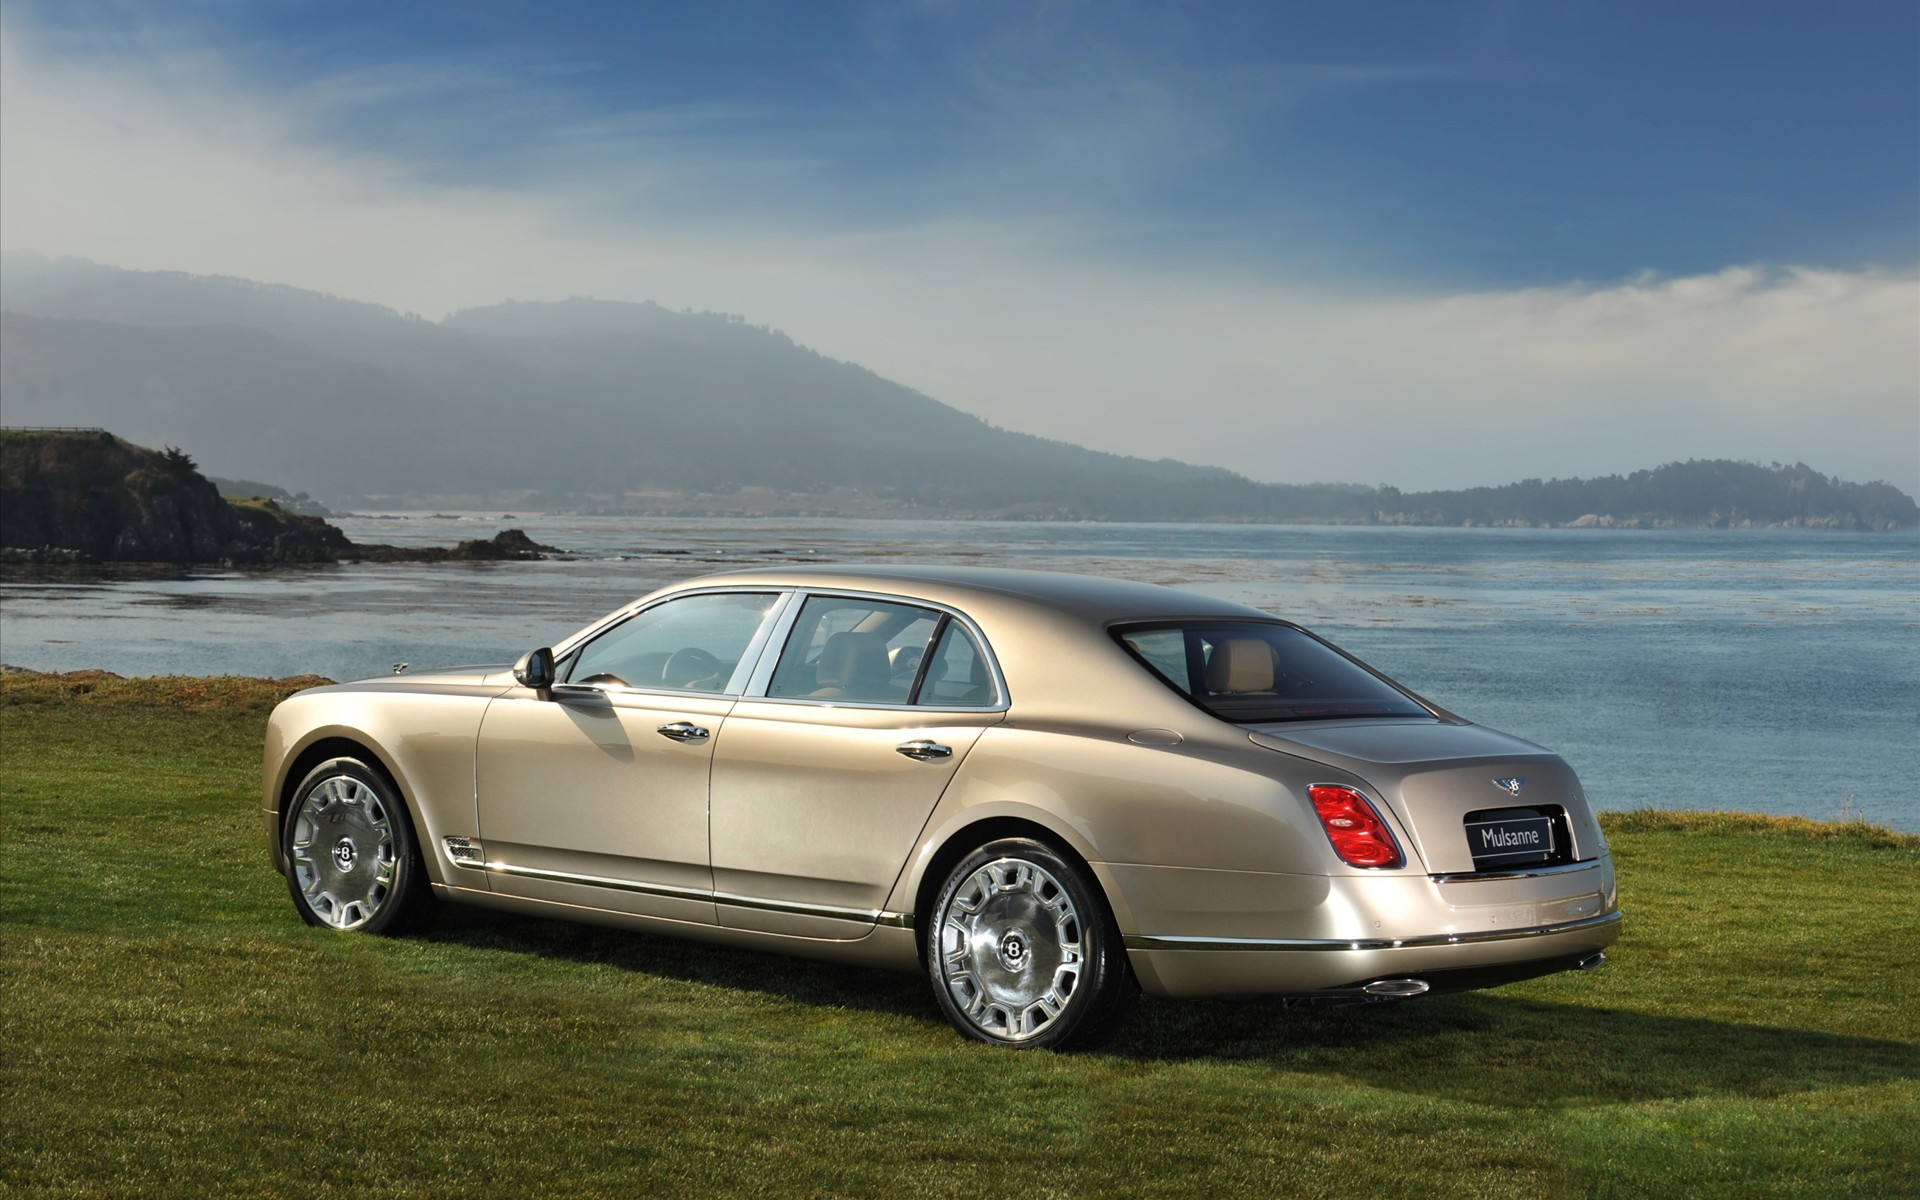 Download High quality Bentley wallpaper / Cars / 1920x1200